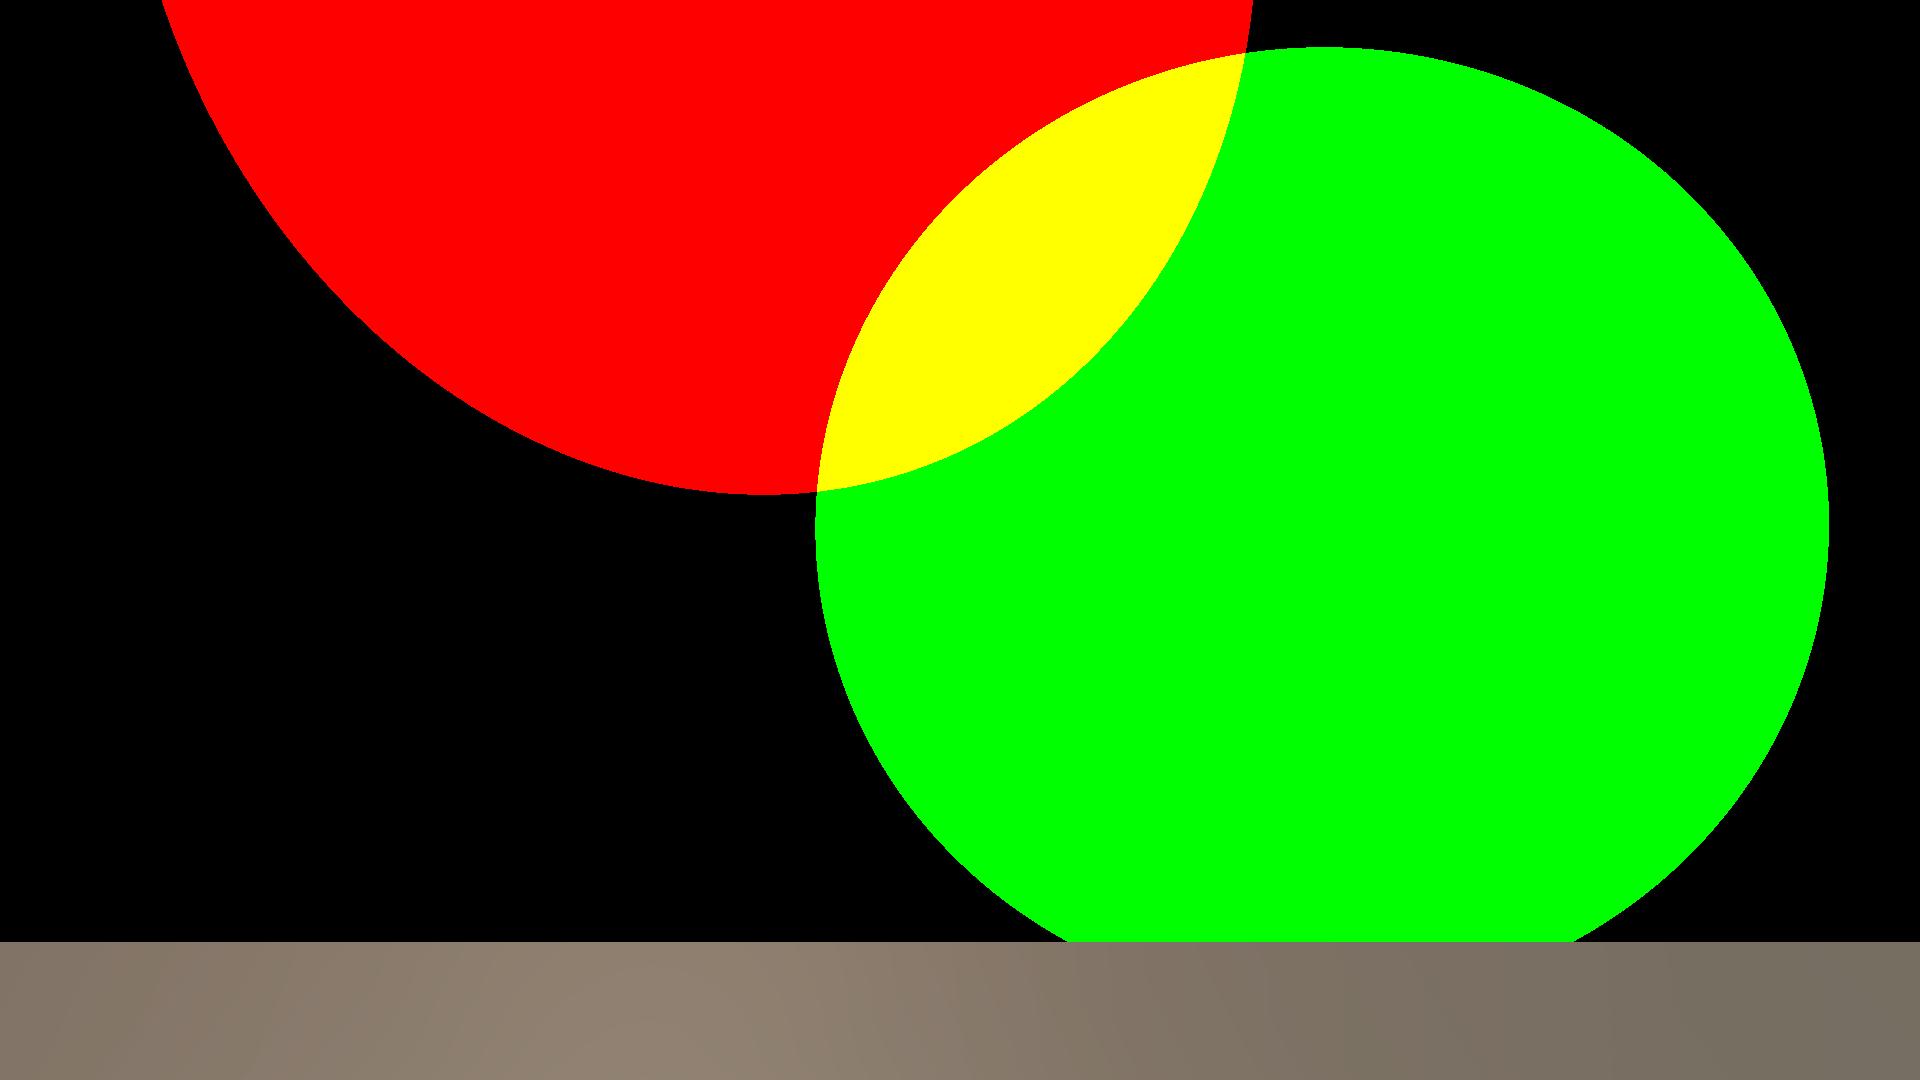 Depiction of the skybox, showing the sun and moon directions as a red and green circle respectively. The grey at the bottom is a standard Unity plane and not part of the skybox.